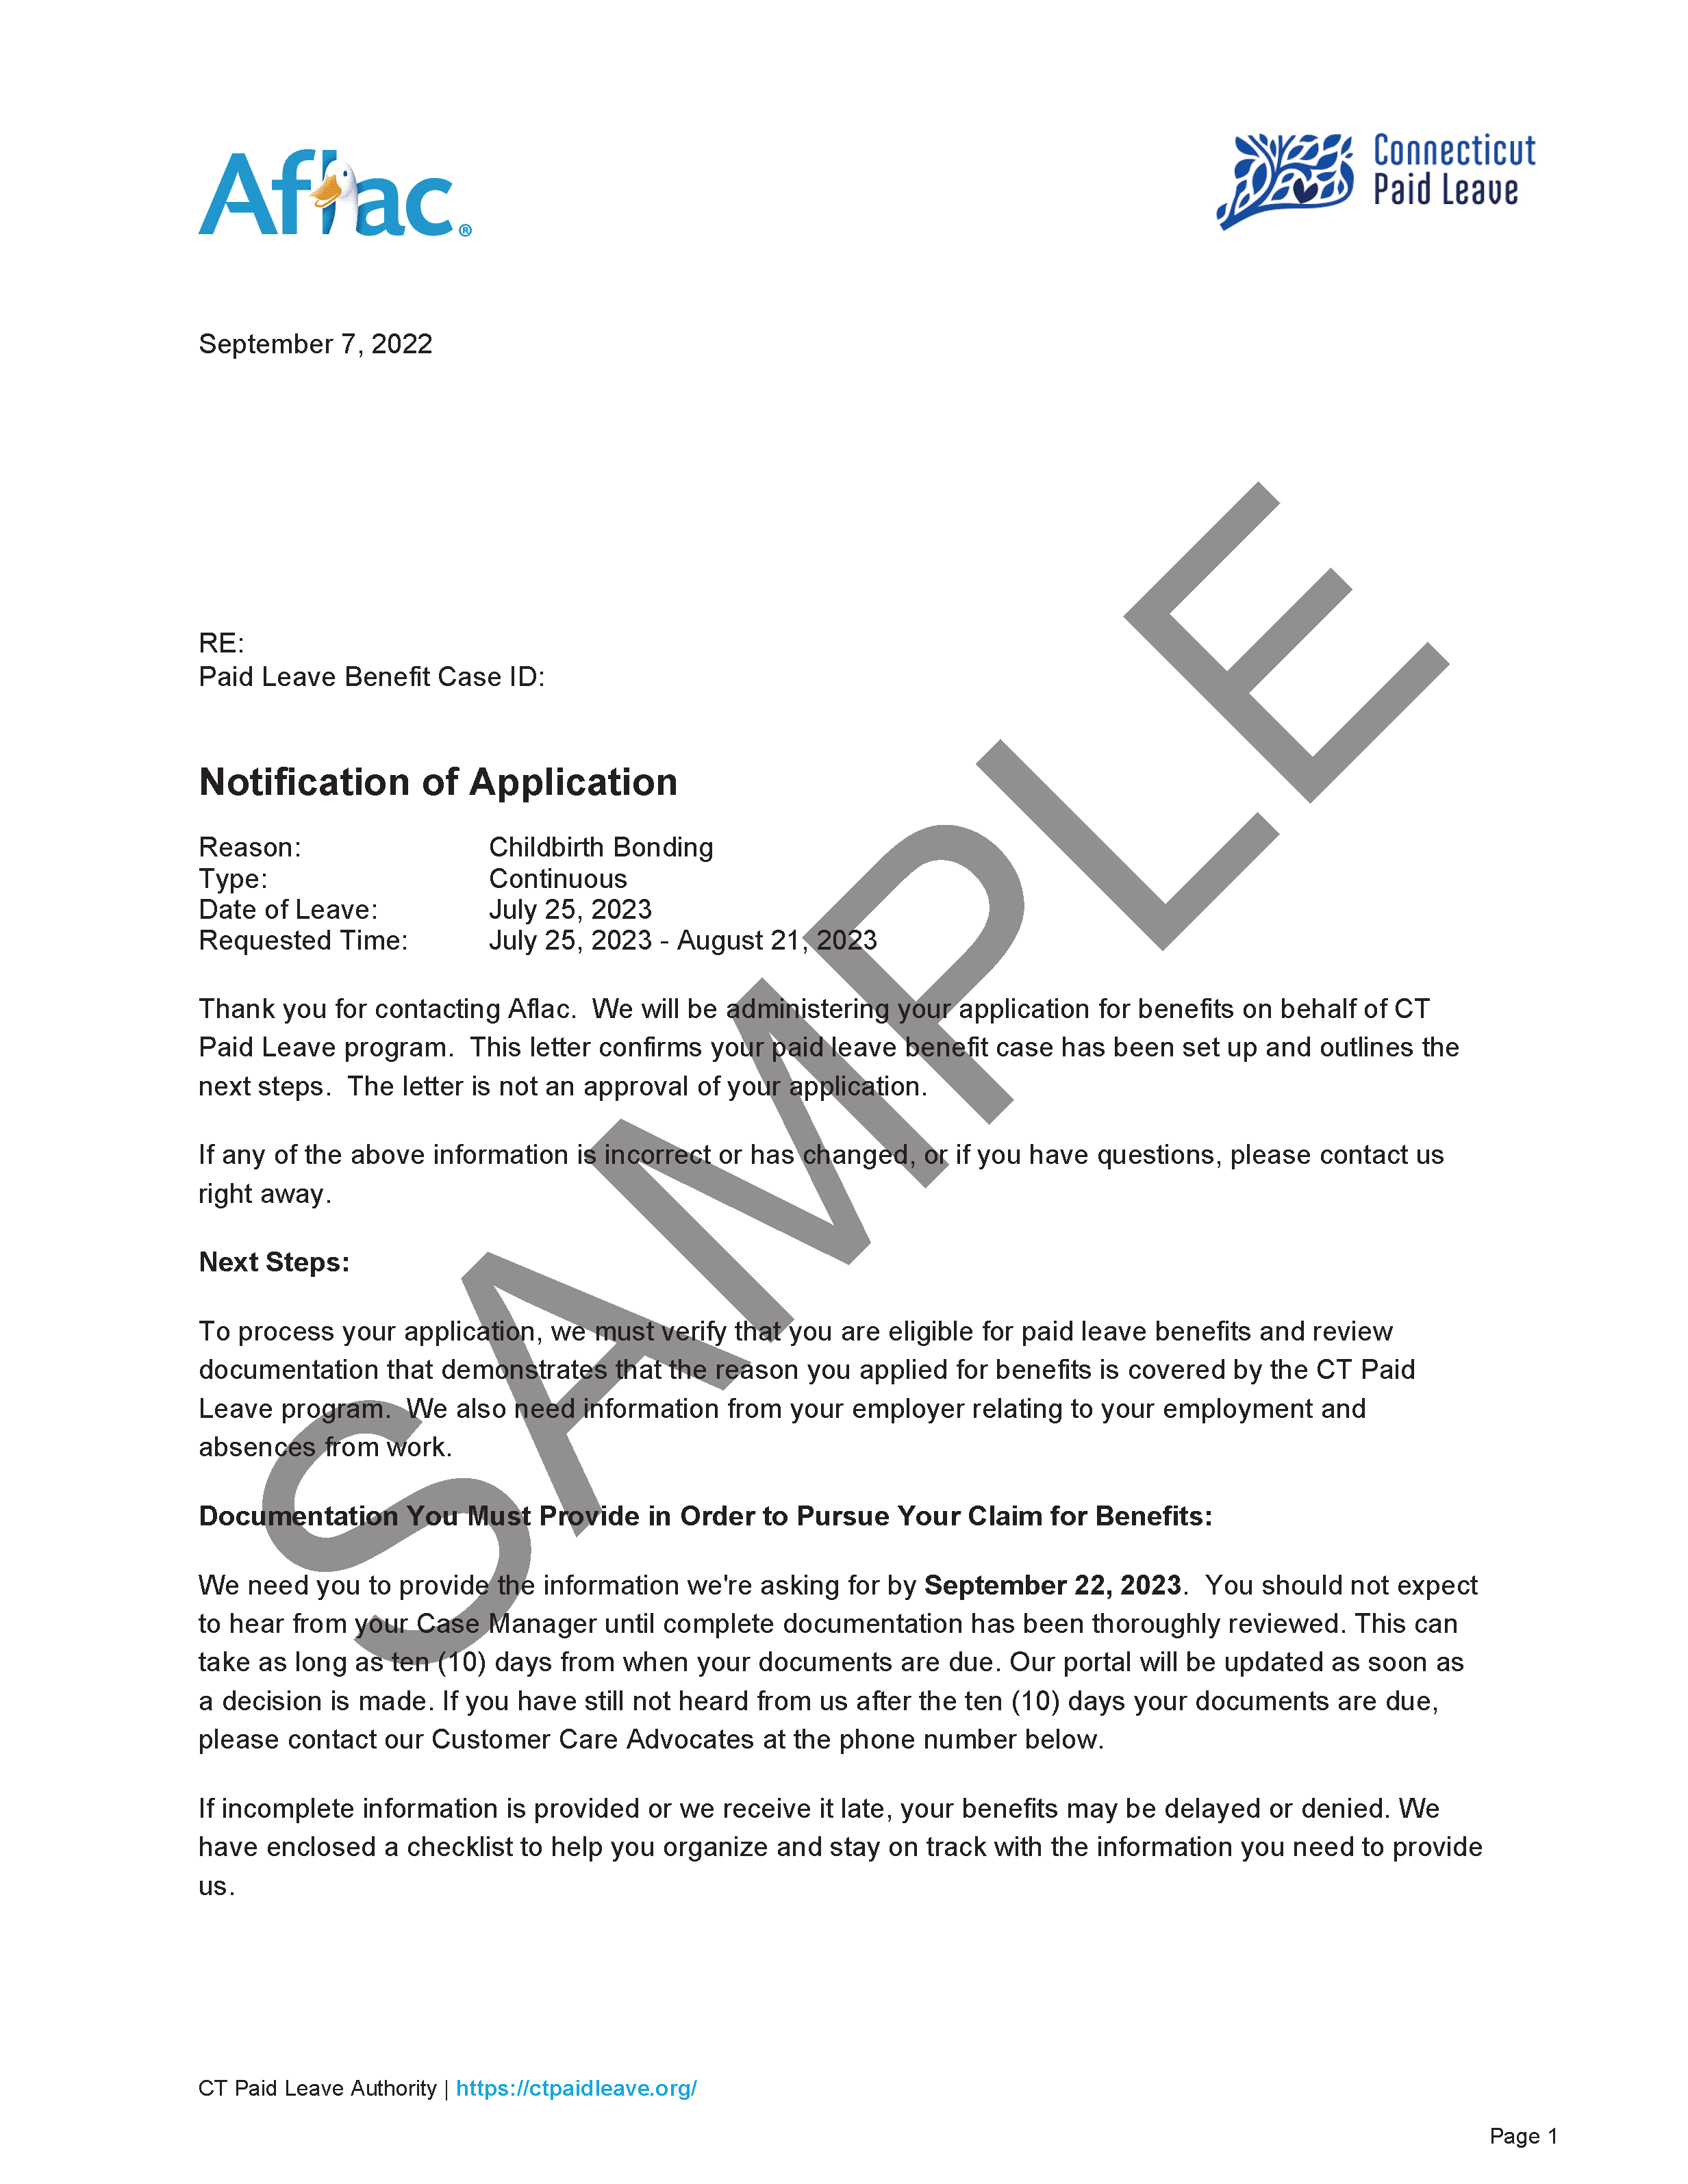 Notification of Application sample document